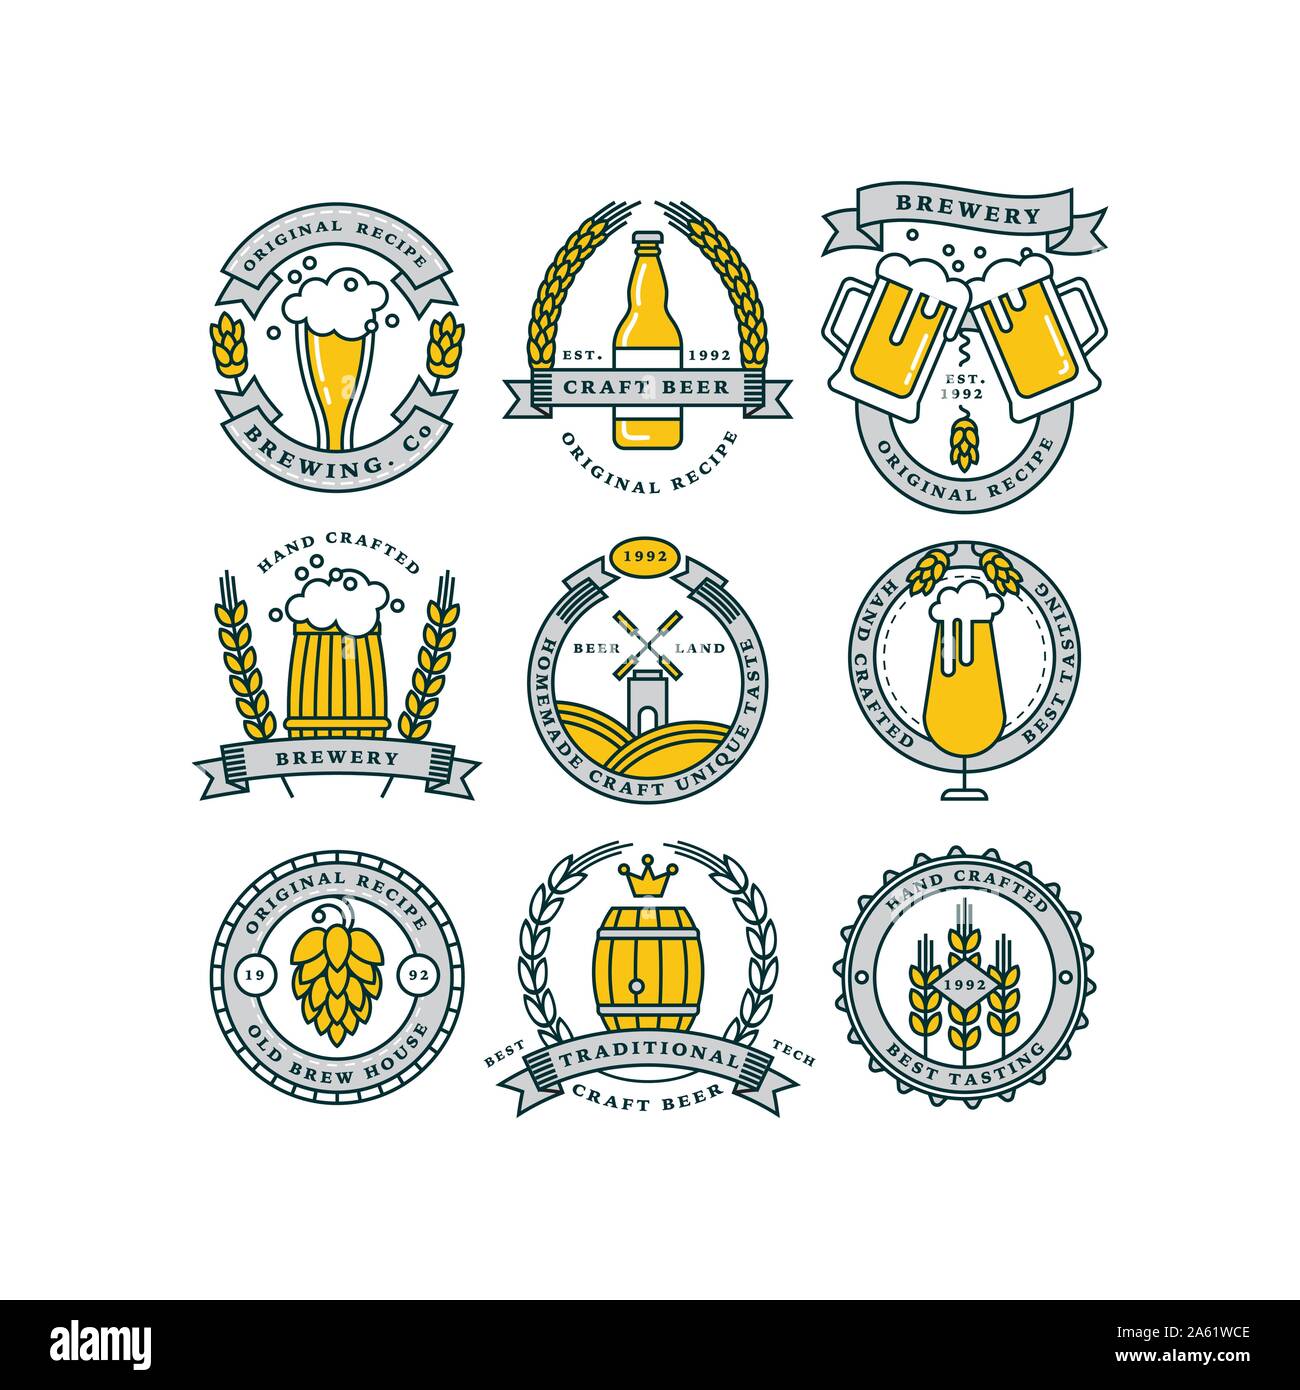 Set of linear yellow brewery logos. Labels with bottles and hops. Vintage craft beer retro design elements, emblems, symbols, and icons or pub labels, Stock Vector